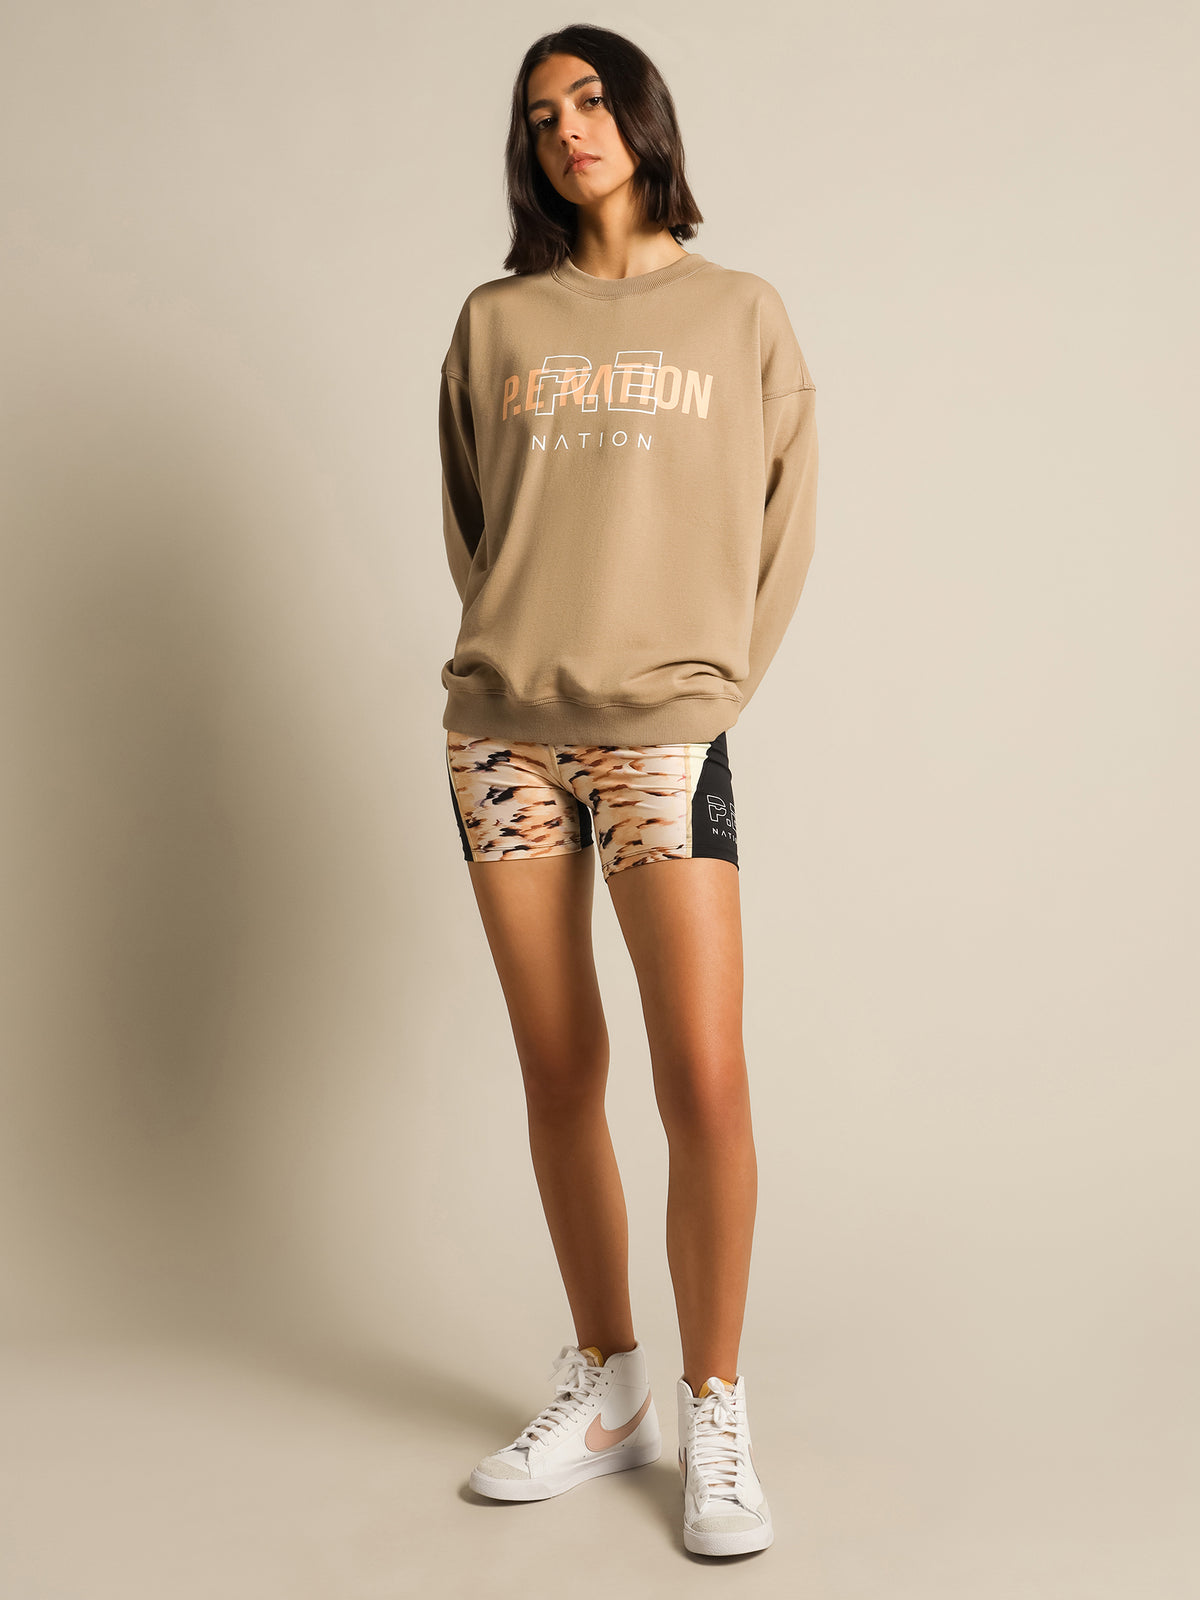 Unity Sweat in Light Taupe